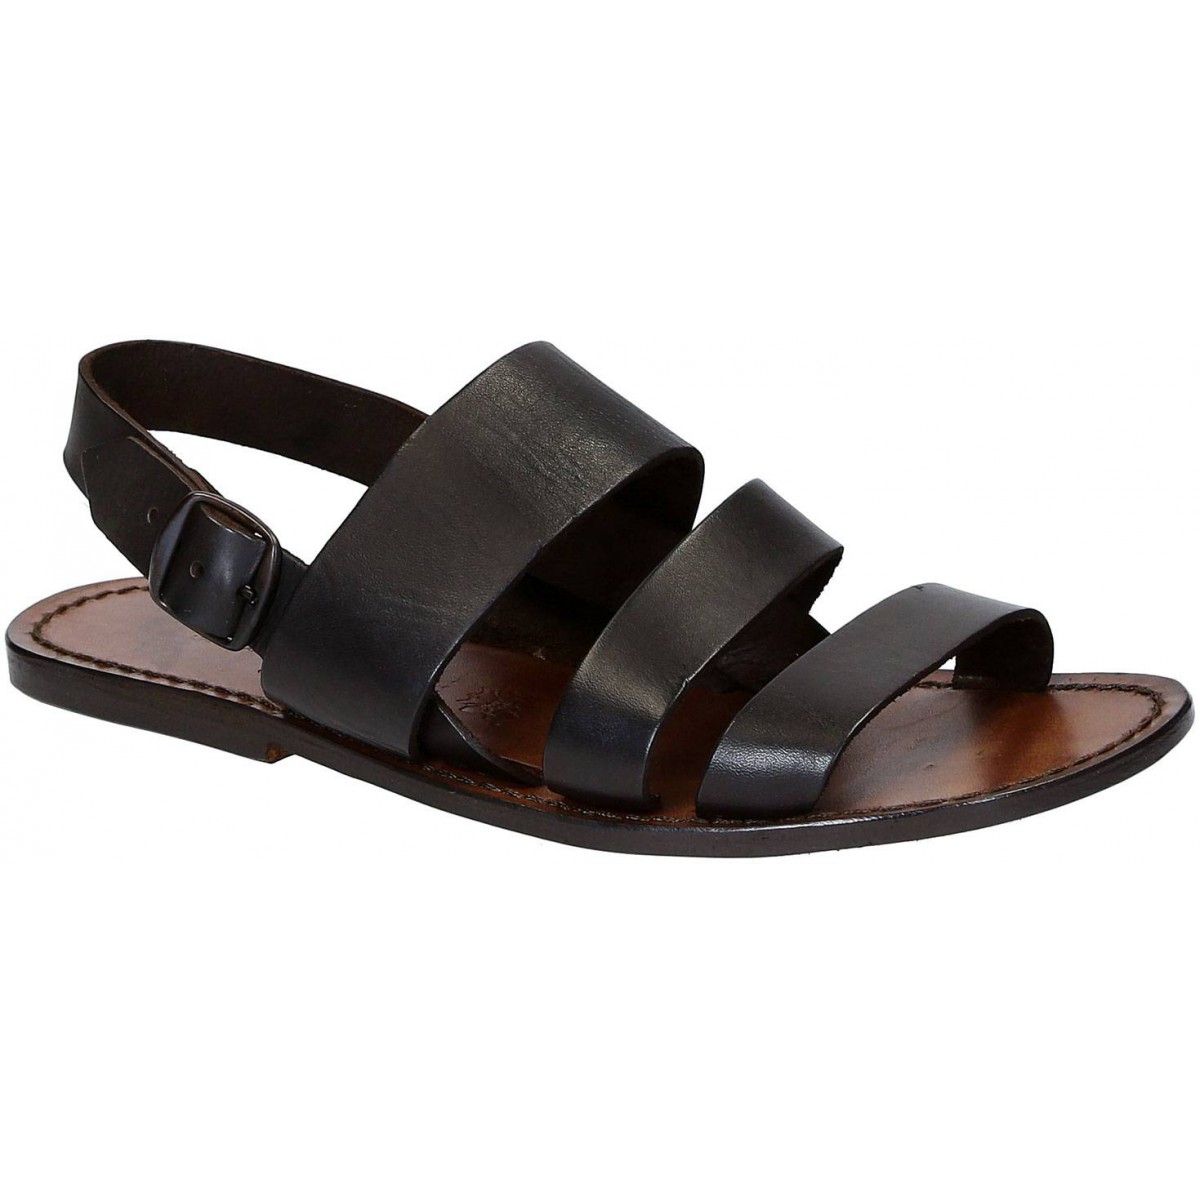 Brown Leather Sandals Handmade In Italy For Mens The Leather Craftsmen 